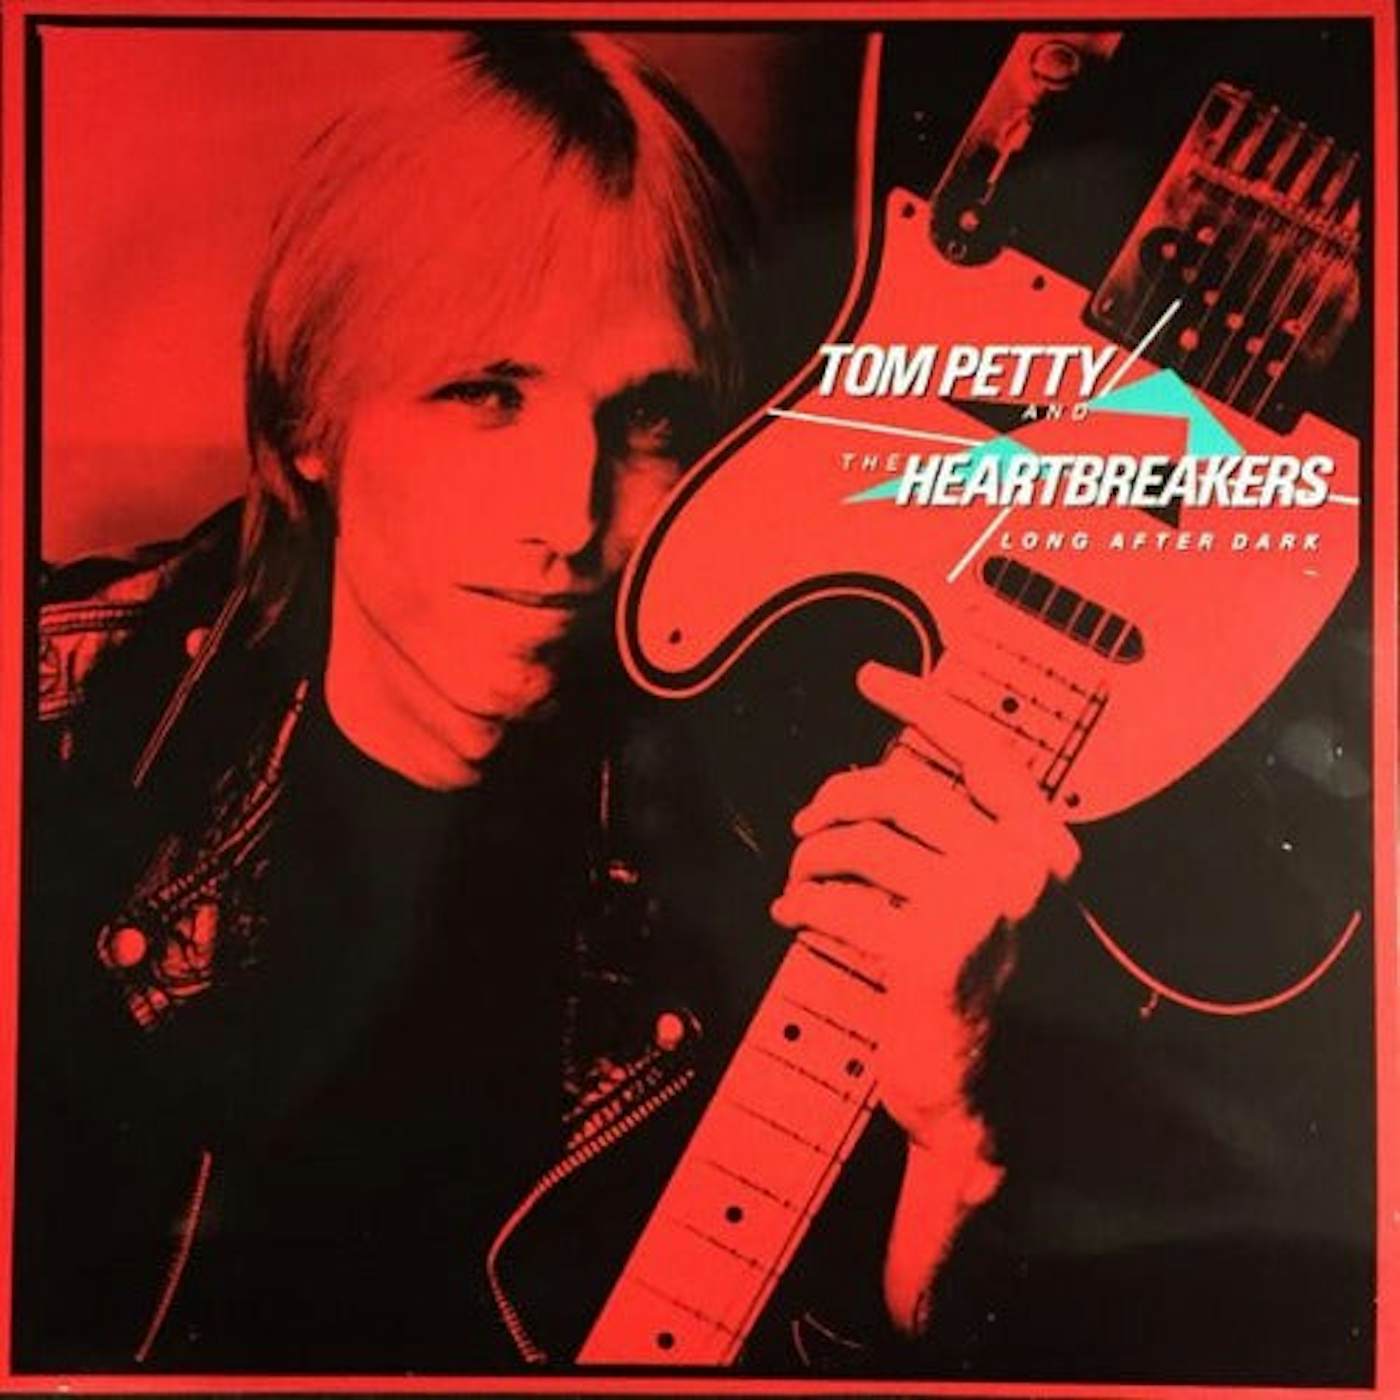 Tom Petty and the Heartbreakers Long After Dark